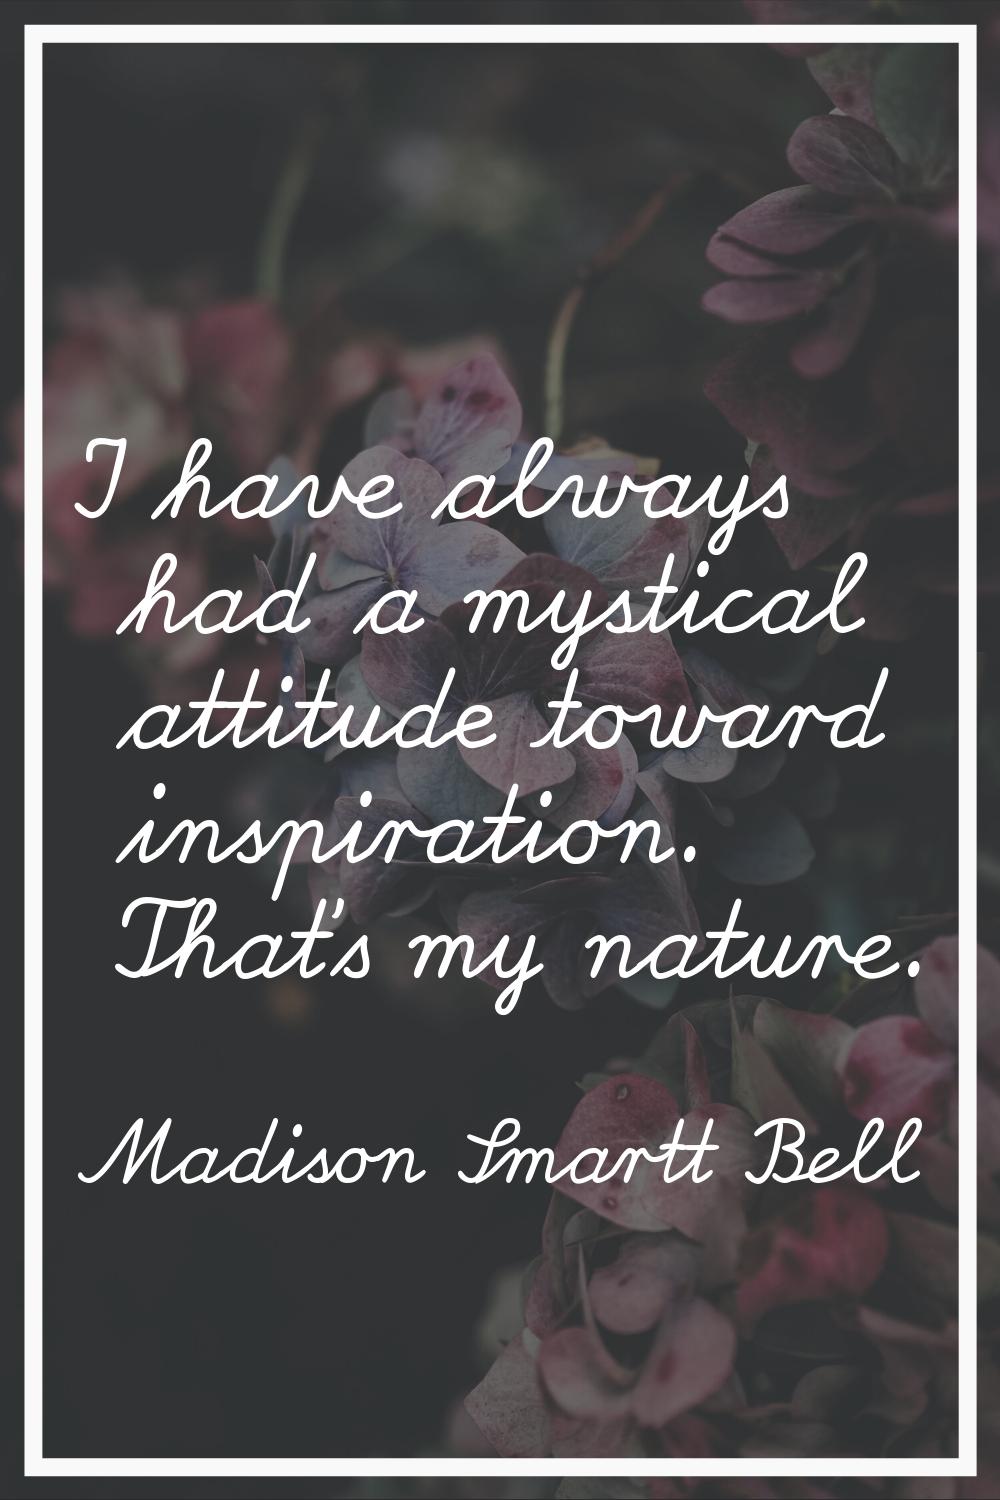 I have always had a mystical attitude toward inspiration. That's my nature.